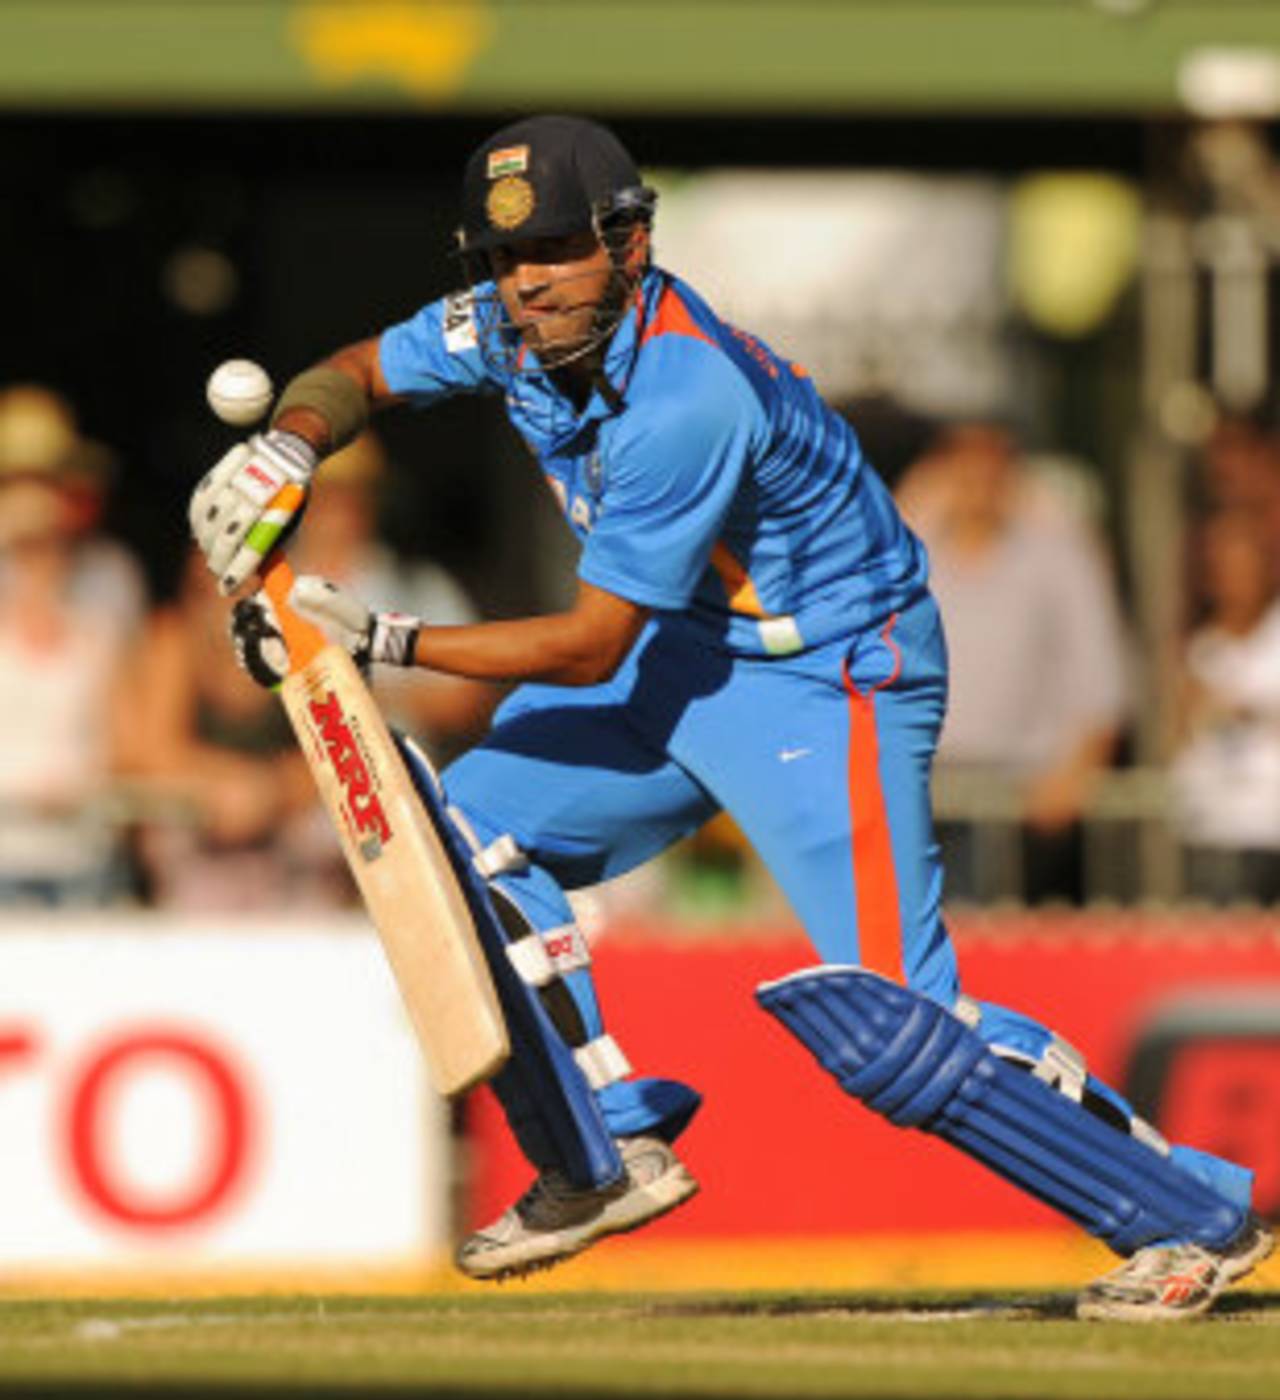 It was another polished effort from Gambhir, whose faultless 91 showed he has moved on well from his Test-match woes&nbsp;&nbsp;&bull;&nbsp;&nbsp;AFP